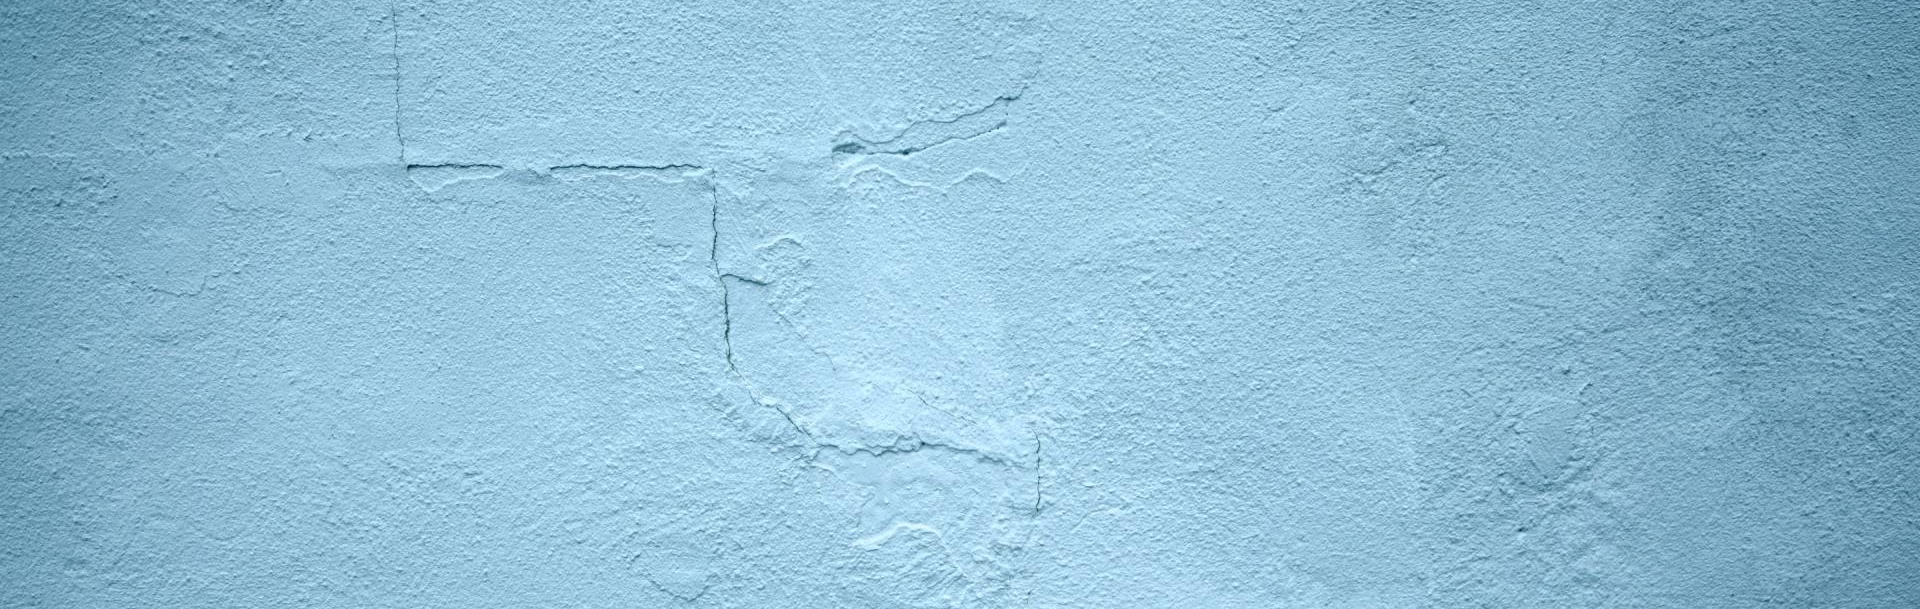 Cracks in a Wall